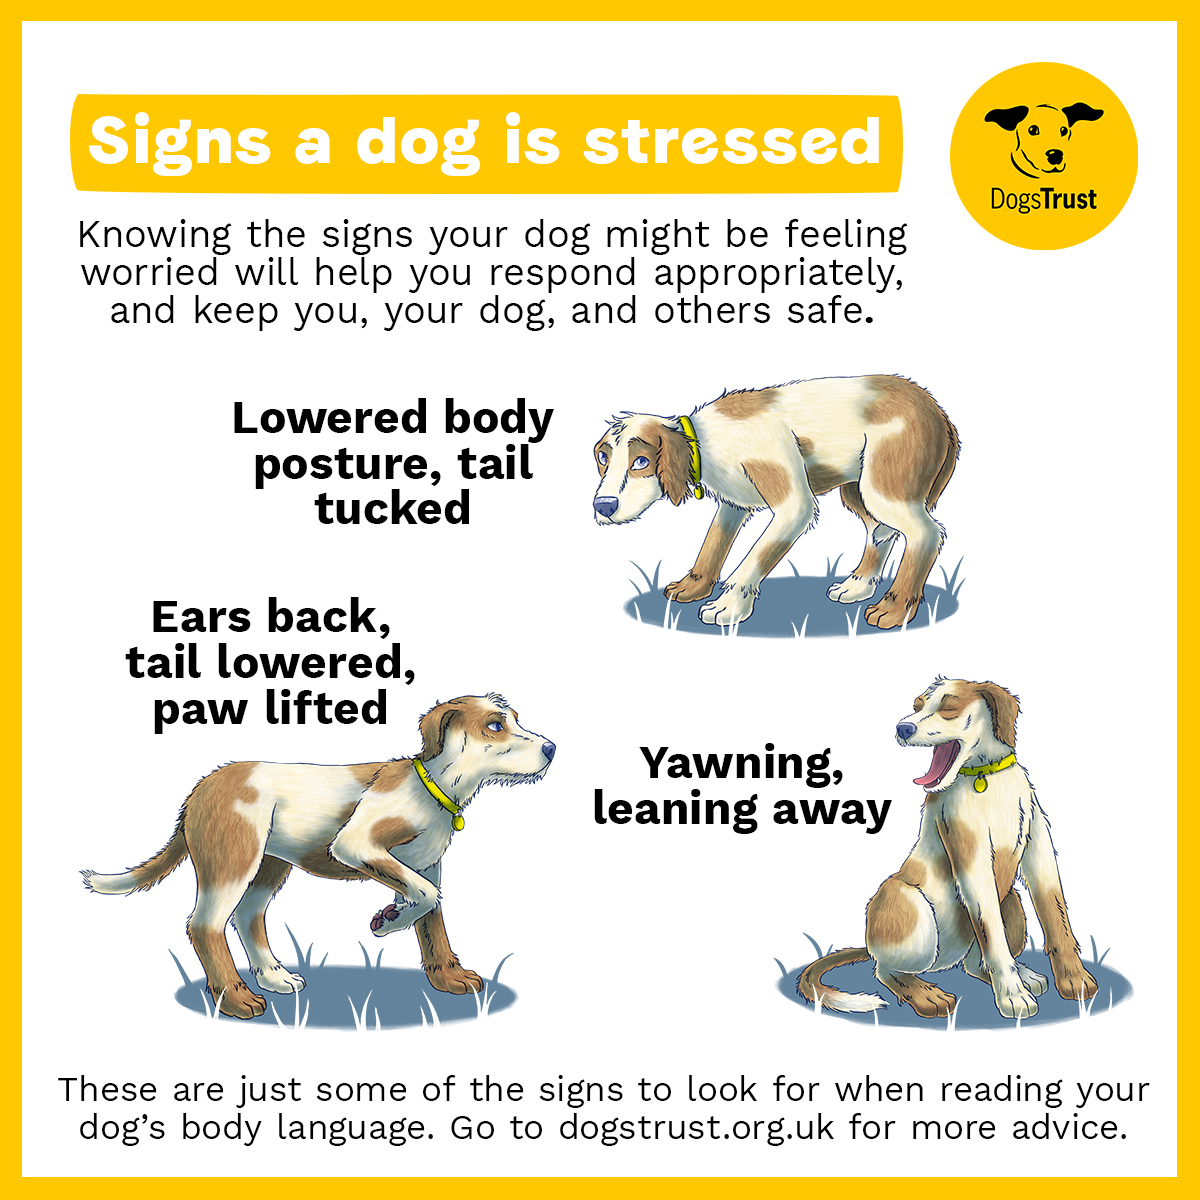 Whilst it's very important to take car of our own mental health, it's also important to look out for signs that your dog may be stressed 💛 Gorgeous Dublin has some tips you can look out for! 👉 #MentalHealthAwarenessWeek